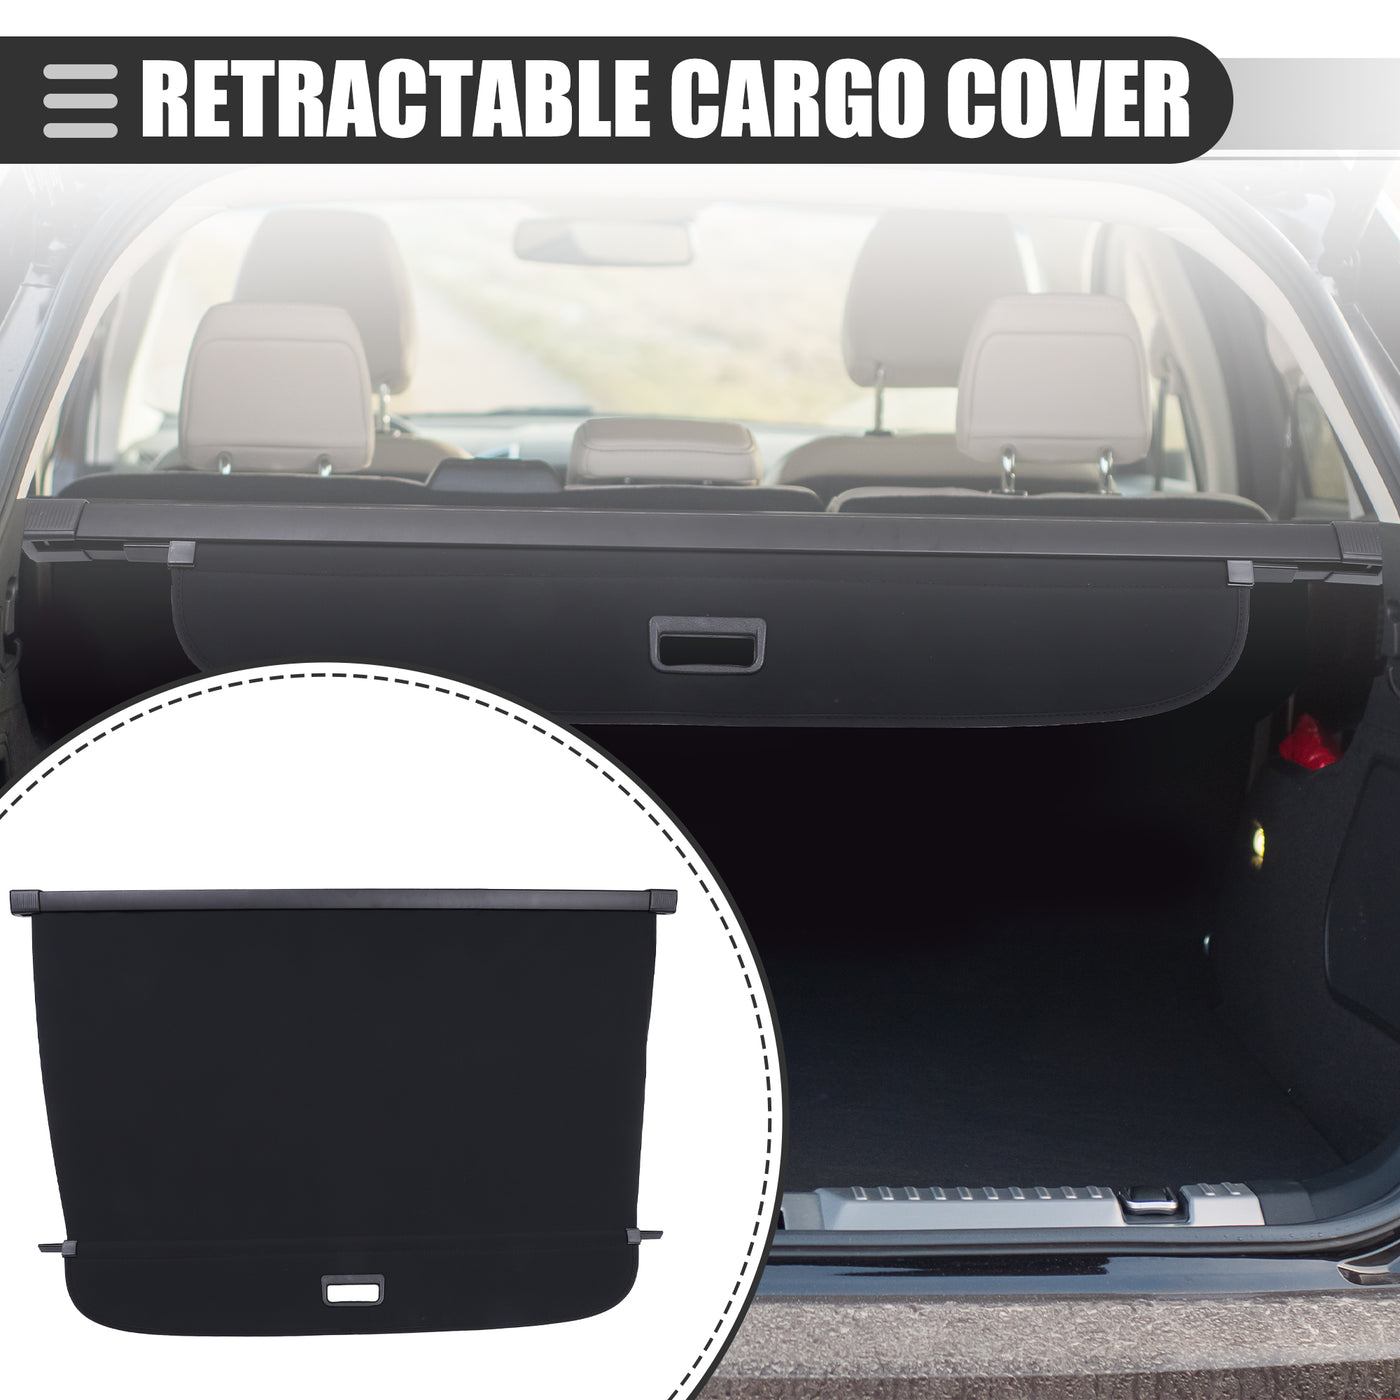 Motoforti Retractable Cargo Cover, Heat Resistant Rear Trunk Security Cover Shield Shade, for Audi Q7 2016-2022, Waterproof Canvas, Black